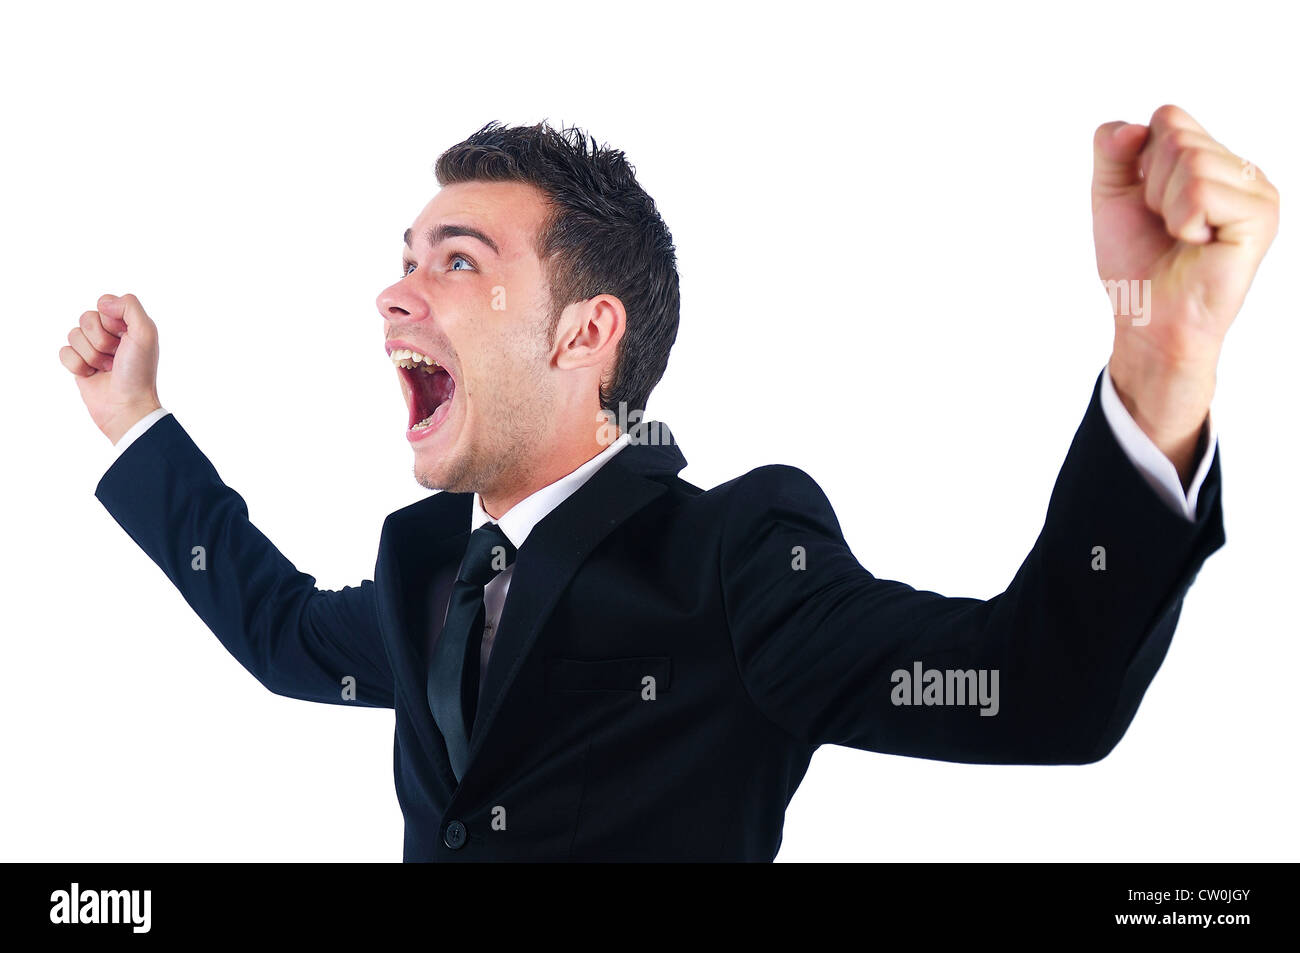 Isolated young business man happy Stock Photo